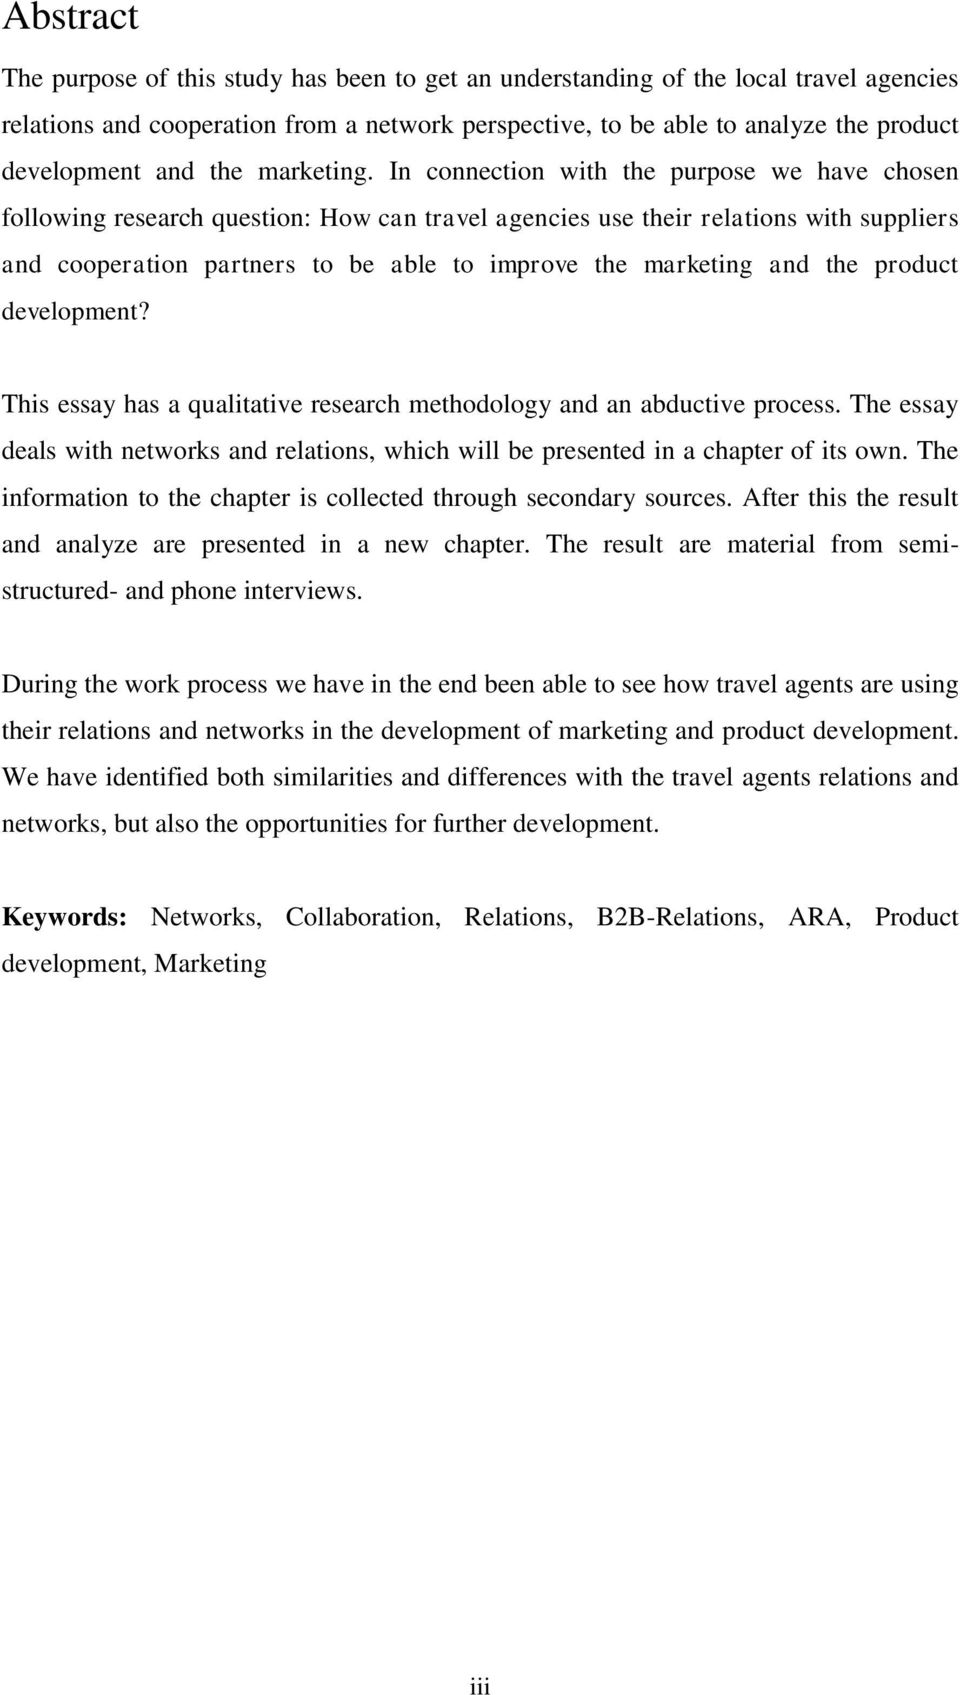 In connection with the purpose we have chosen following research question: How can travel agencies use their relations with suppliers and cooperation partners to be able to improve the marketing and